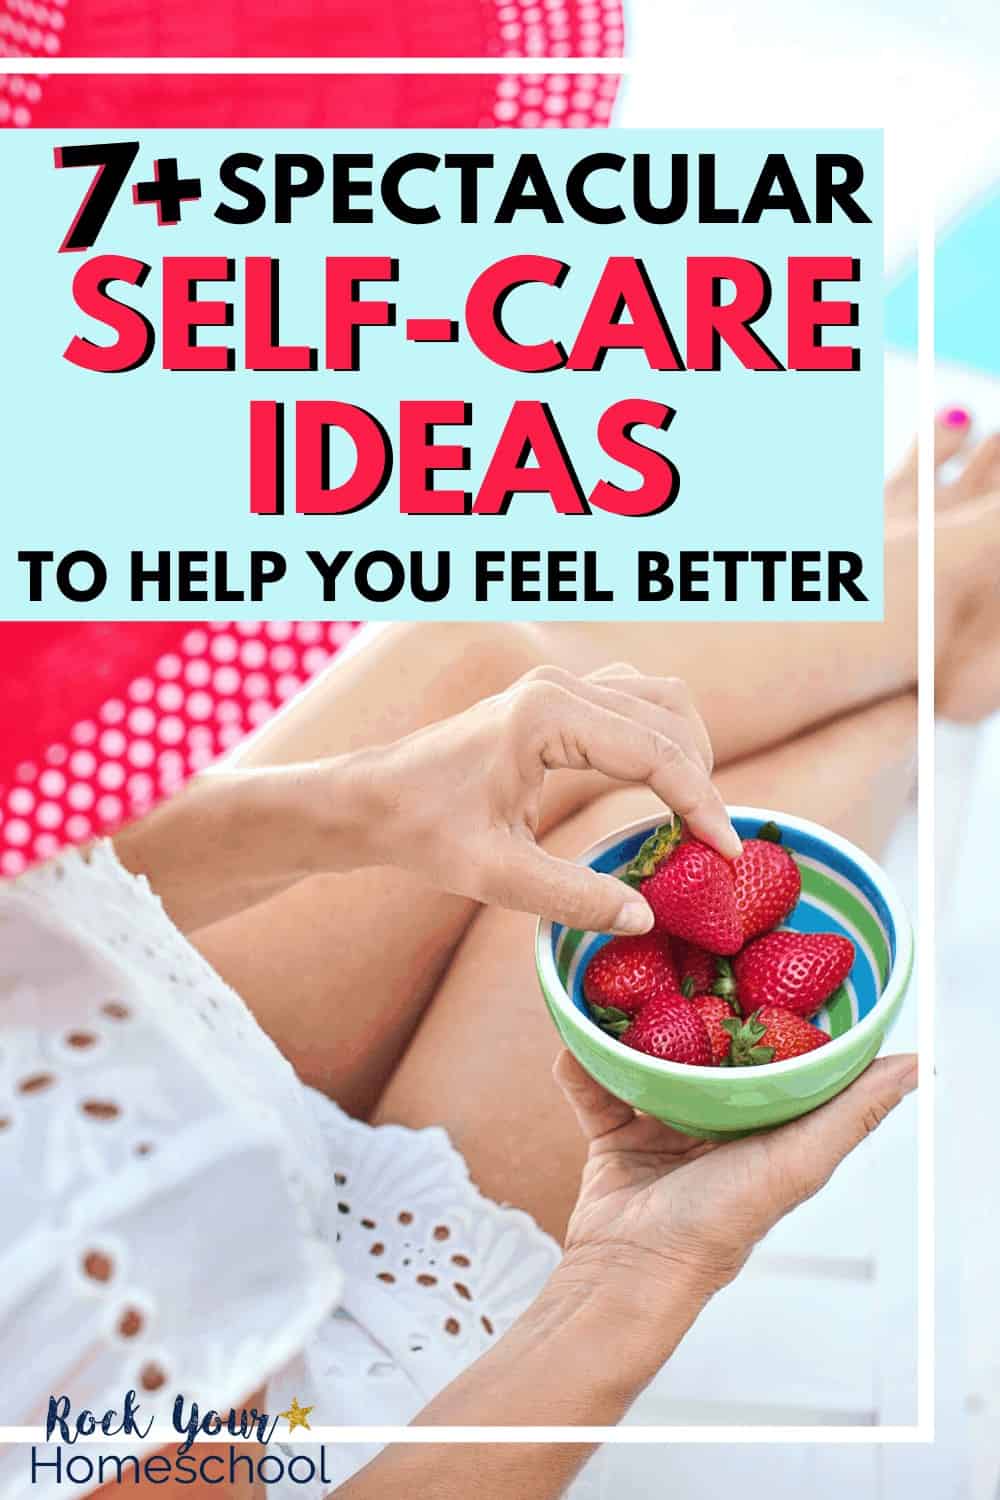 7+ Spectacular Self-Care Ideas to Help You Feel Better